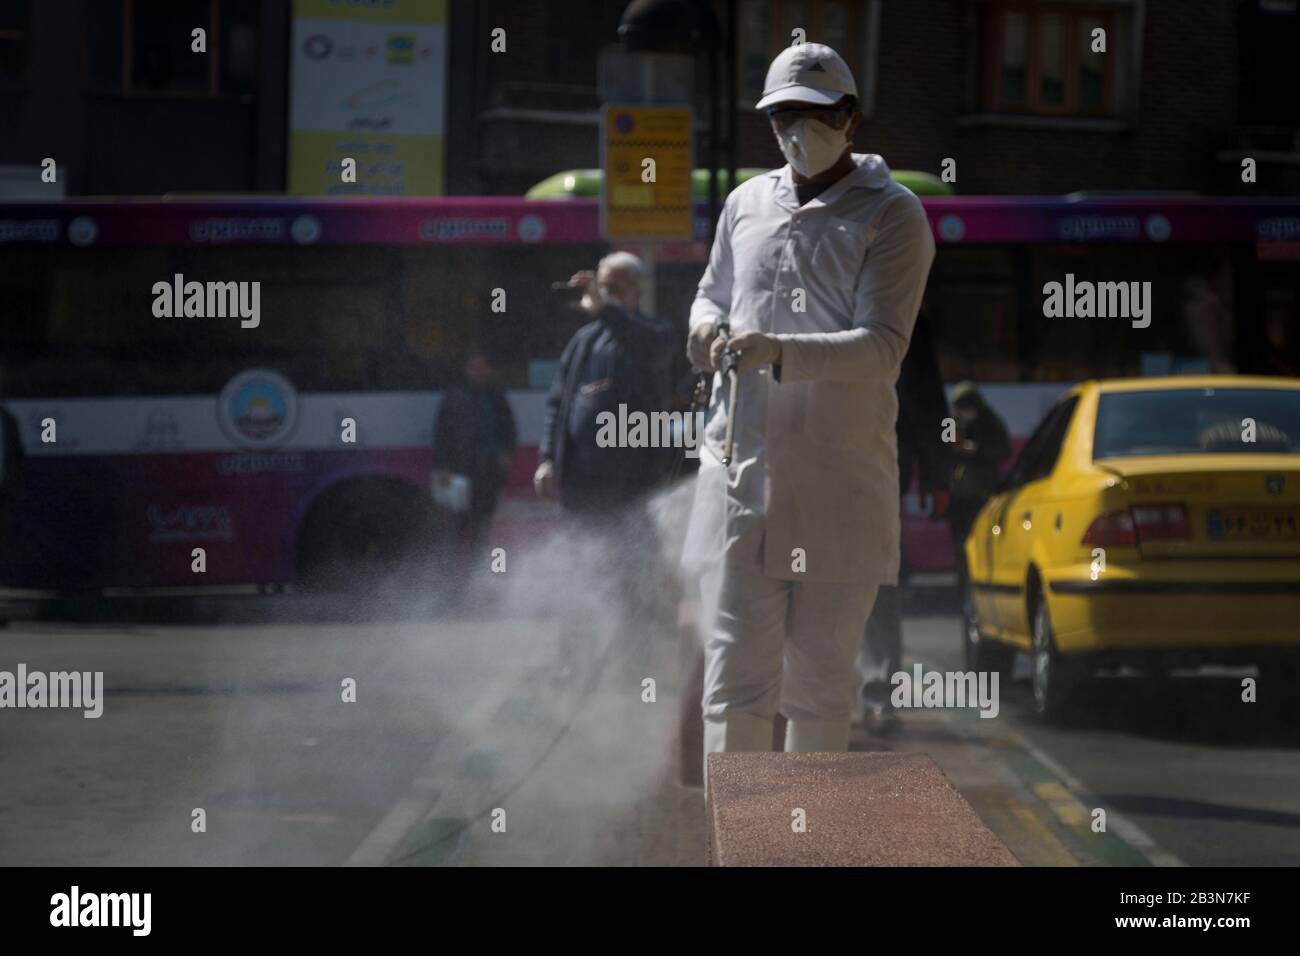 Tehran, Iran. 5th Mar, 2020. Iranian firefighters and municipality workers disinfect a street because of the new coronavirus (COVID-19) in northern Tehran, Iran. Iran today reported 15 new deaths from the novel coronavirus and 591 fresh cases in the past 24 hours, bringing the toll to 107 dead and 3,513 infected. Iran has one of the highest death tolls in the world from the new coronavirus outside of China, the epicenter of the outbreak. Credit: Rouzbeh Fouladi/ZUMA Wire/Alamy Live News Stock Photo